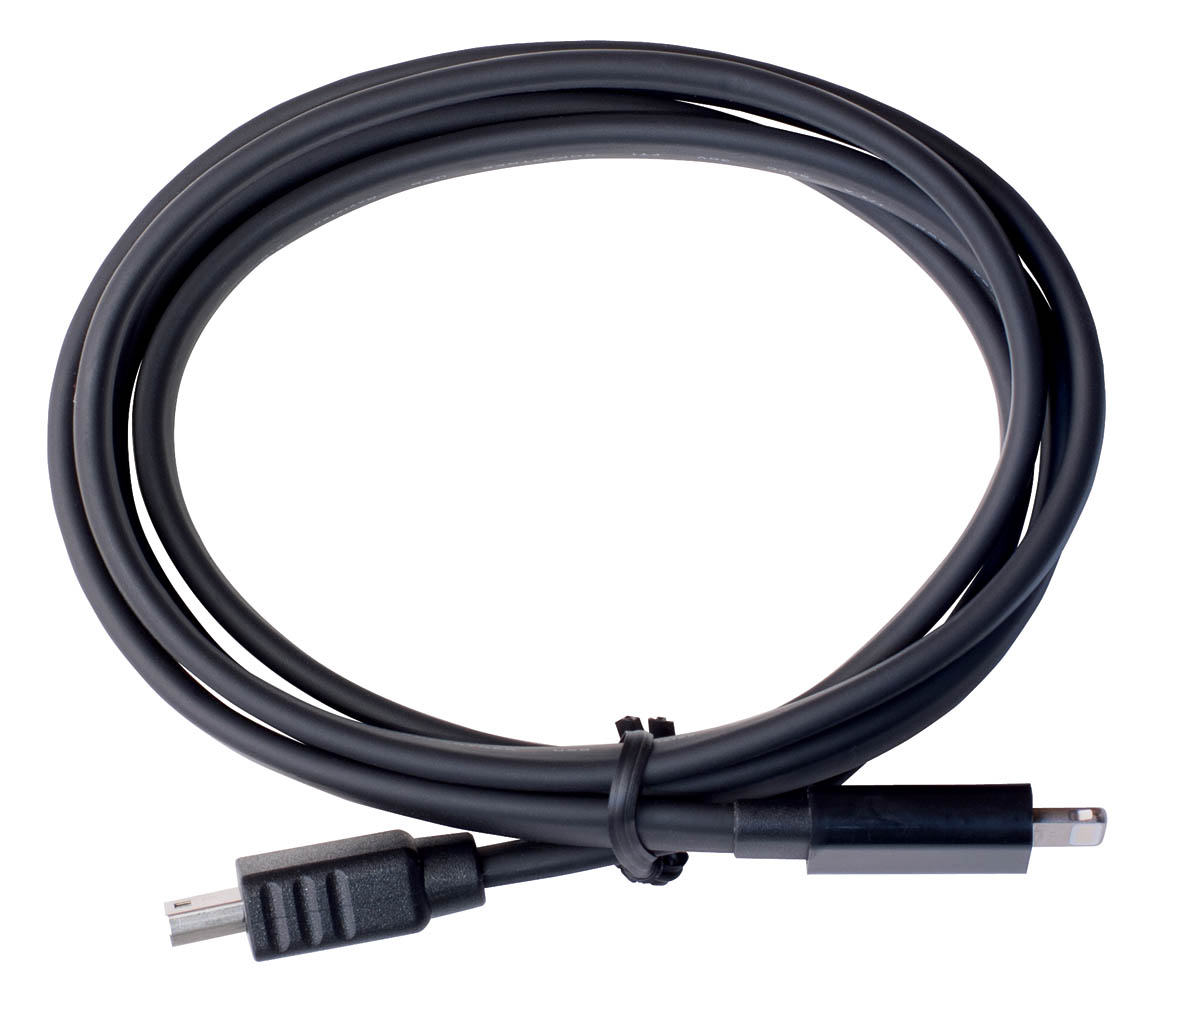 Picture of Apogee 141024 1m Lightning iPad Cable for One iOS